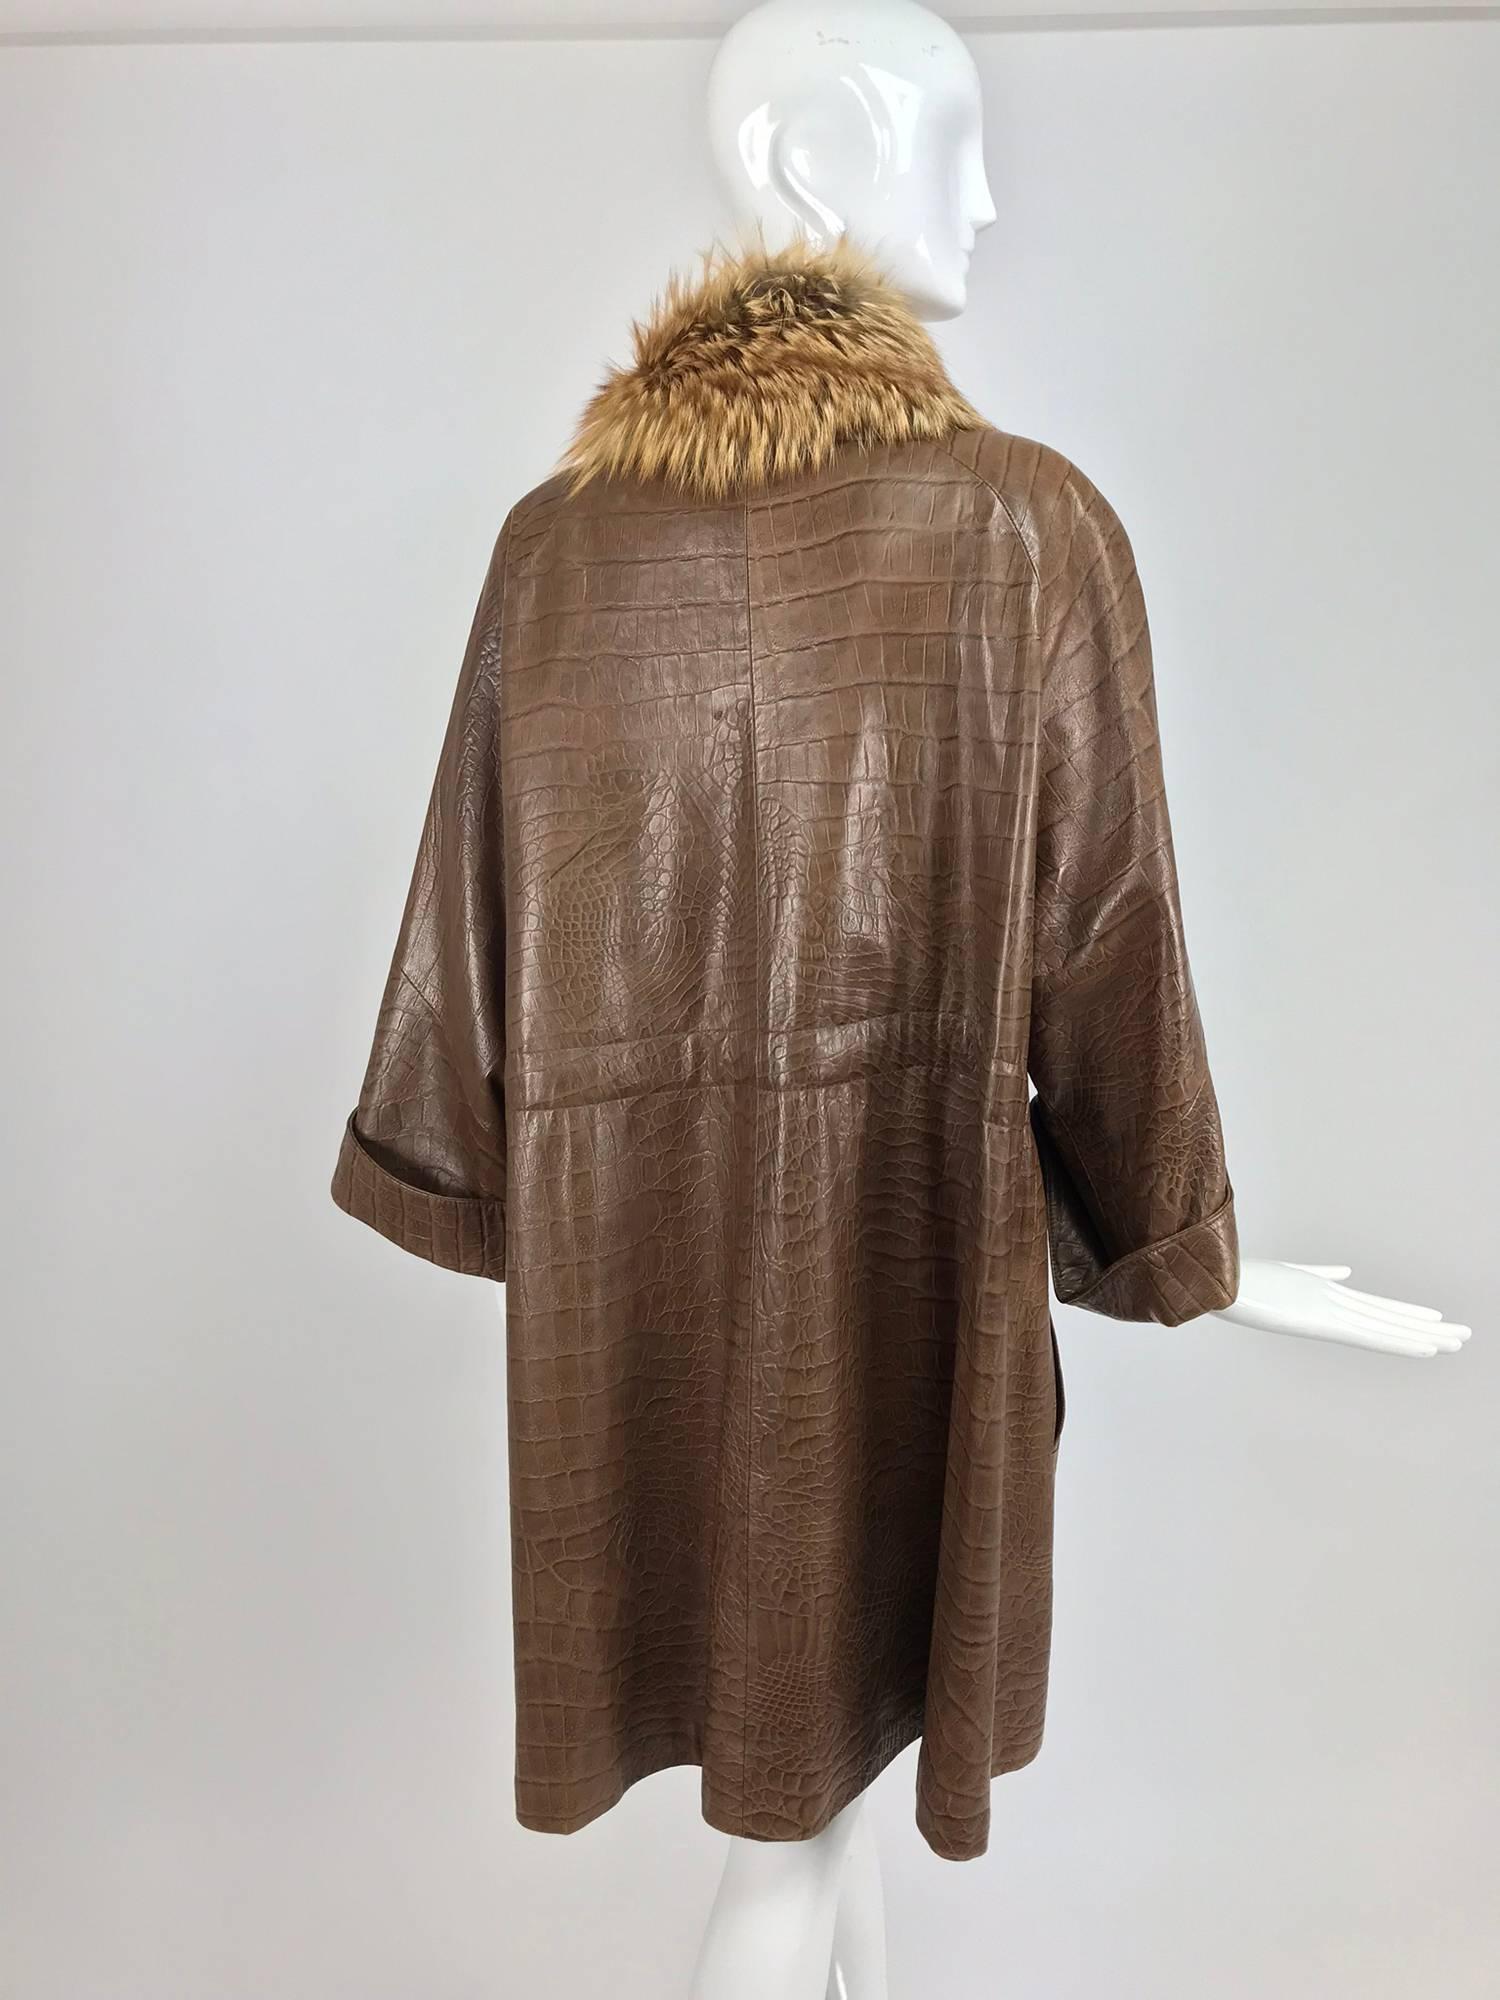 Women's Amen Wardy embossed leather alligator coat with red fox fur trim 1980s